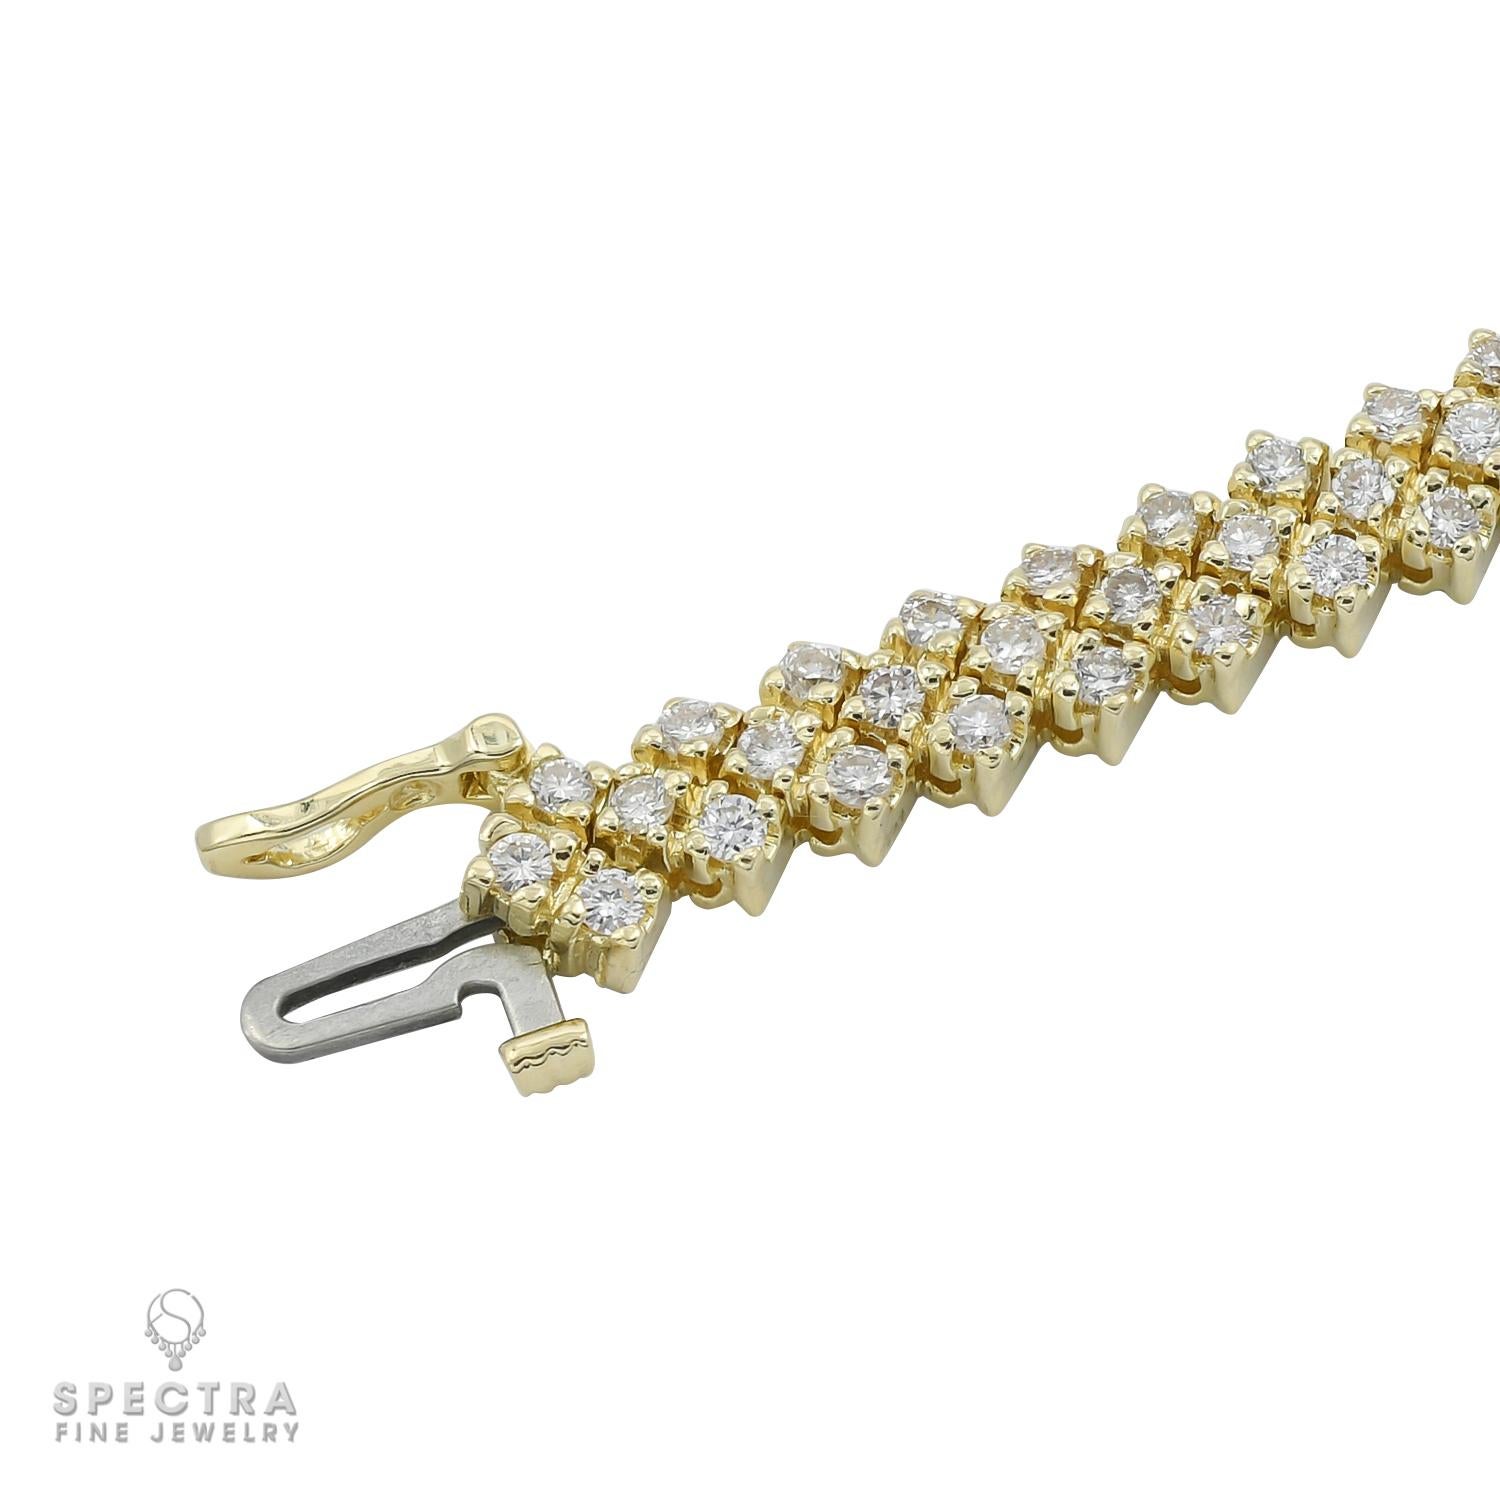 A line bracelet set with 135 round diamonds weighing a total of 4.05 carats.
Each diamond is approximately 0.03 carat.
Diamonds are natural, with G-H-I color, VS-SI clarity.
Bracelet is 7.15 inches long.
Metal is 14k yellow gold; gross weight 25.64